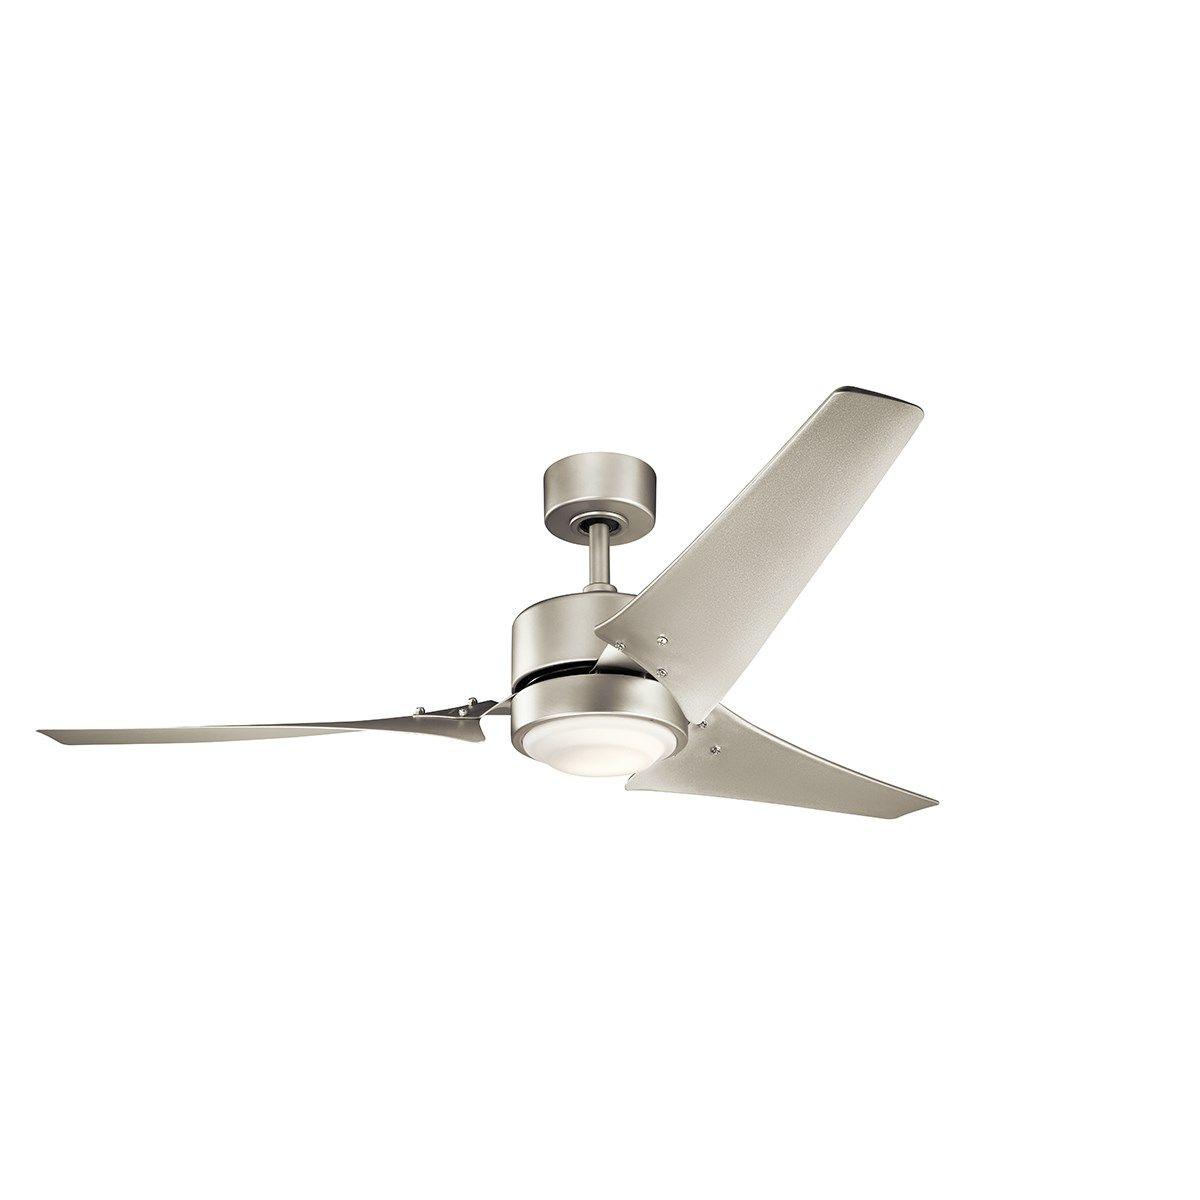 Rana 60 Inch Modern Propeller Outdoor Ceiling Fan With Light, Wall Control Included - Bees Lighting